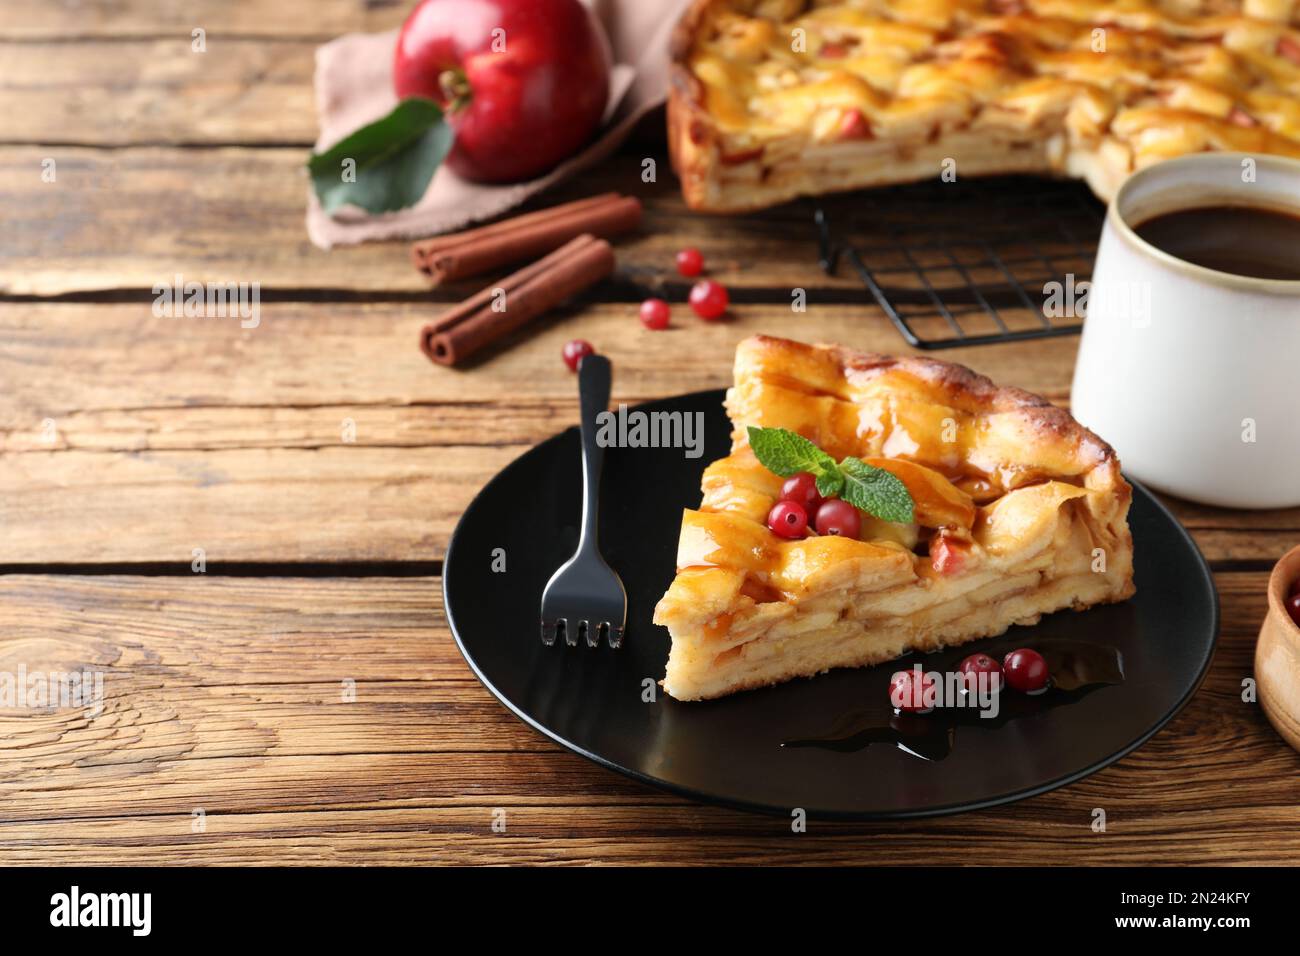 Slice of traditional apple pie with berries served on wooden table Stock Photo